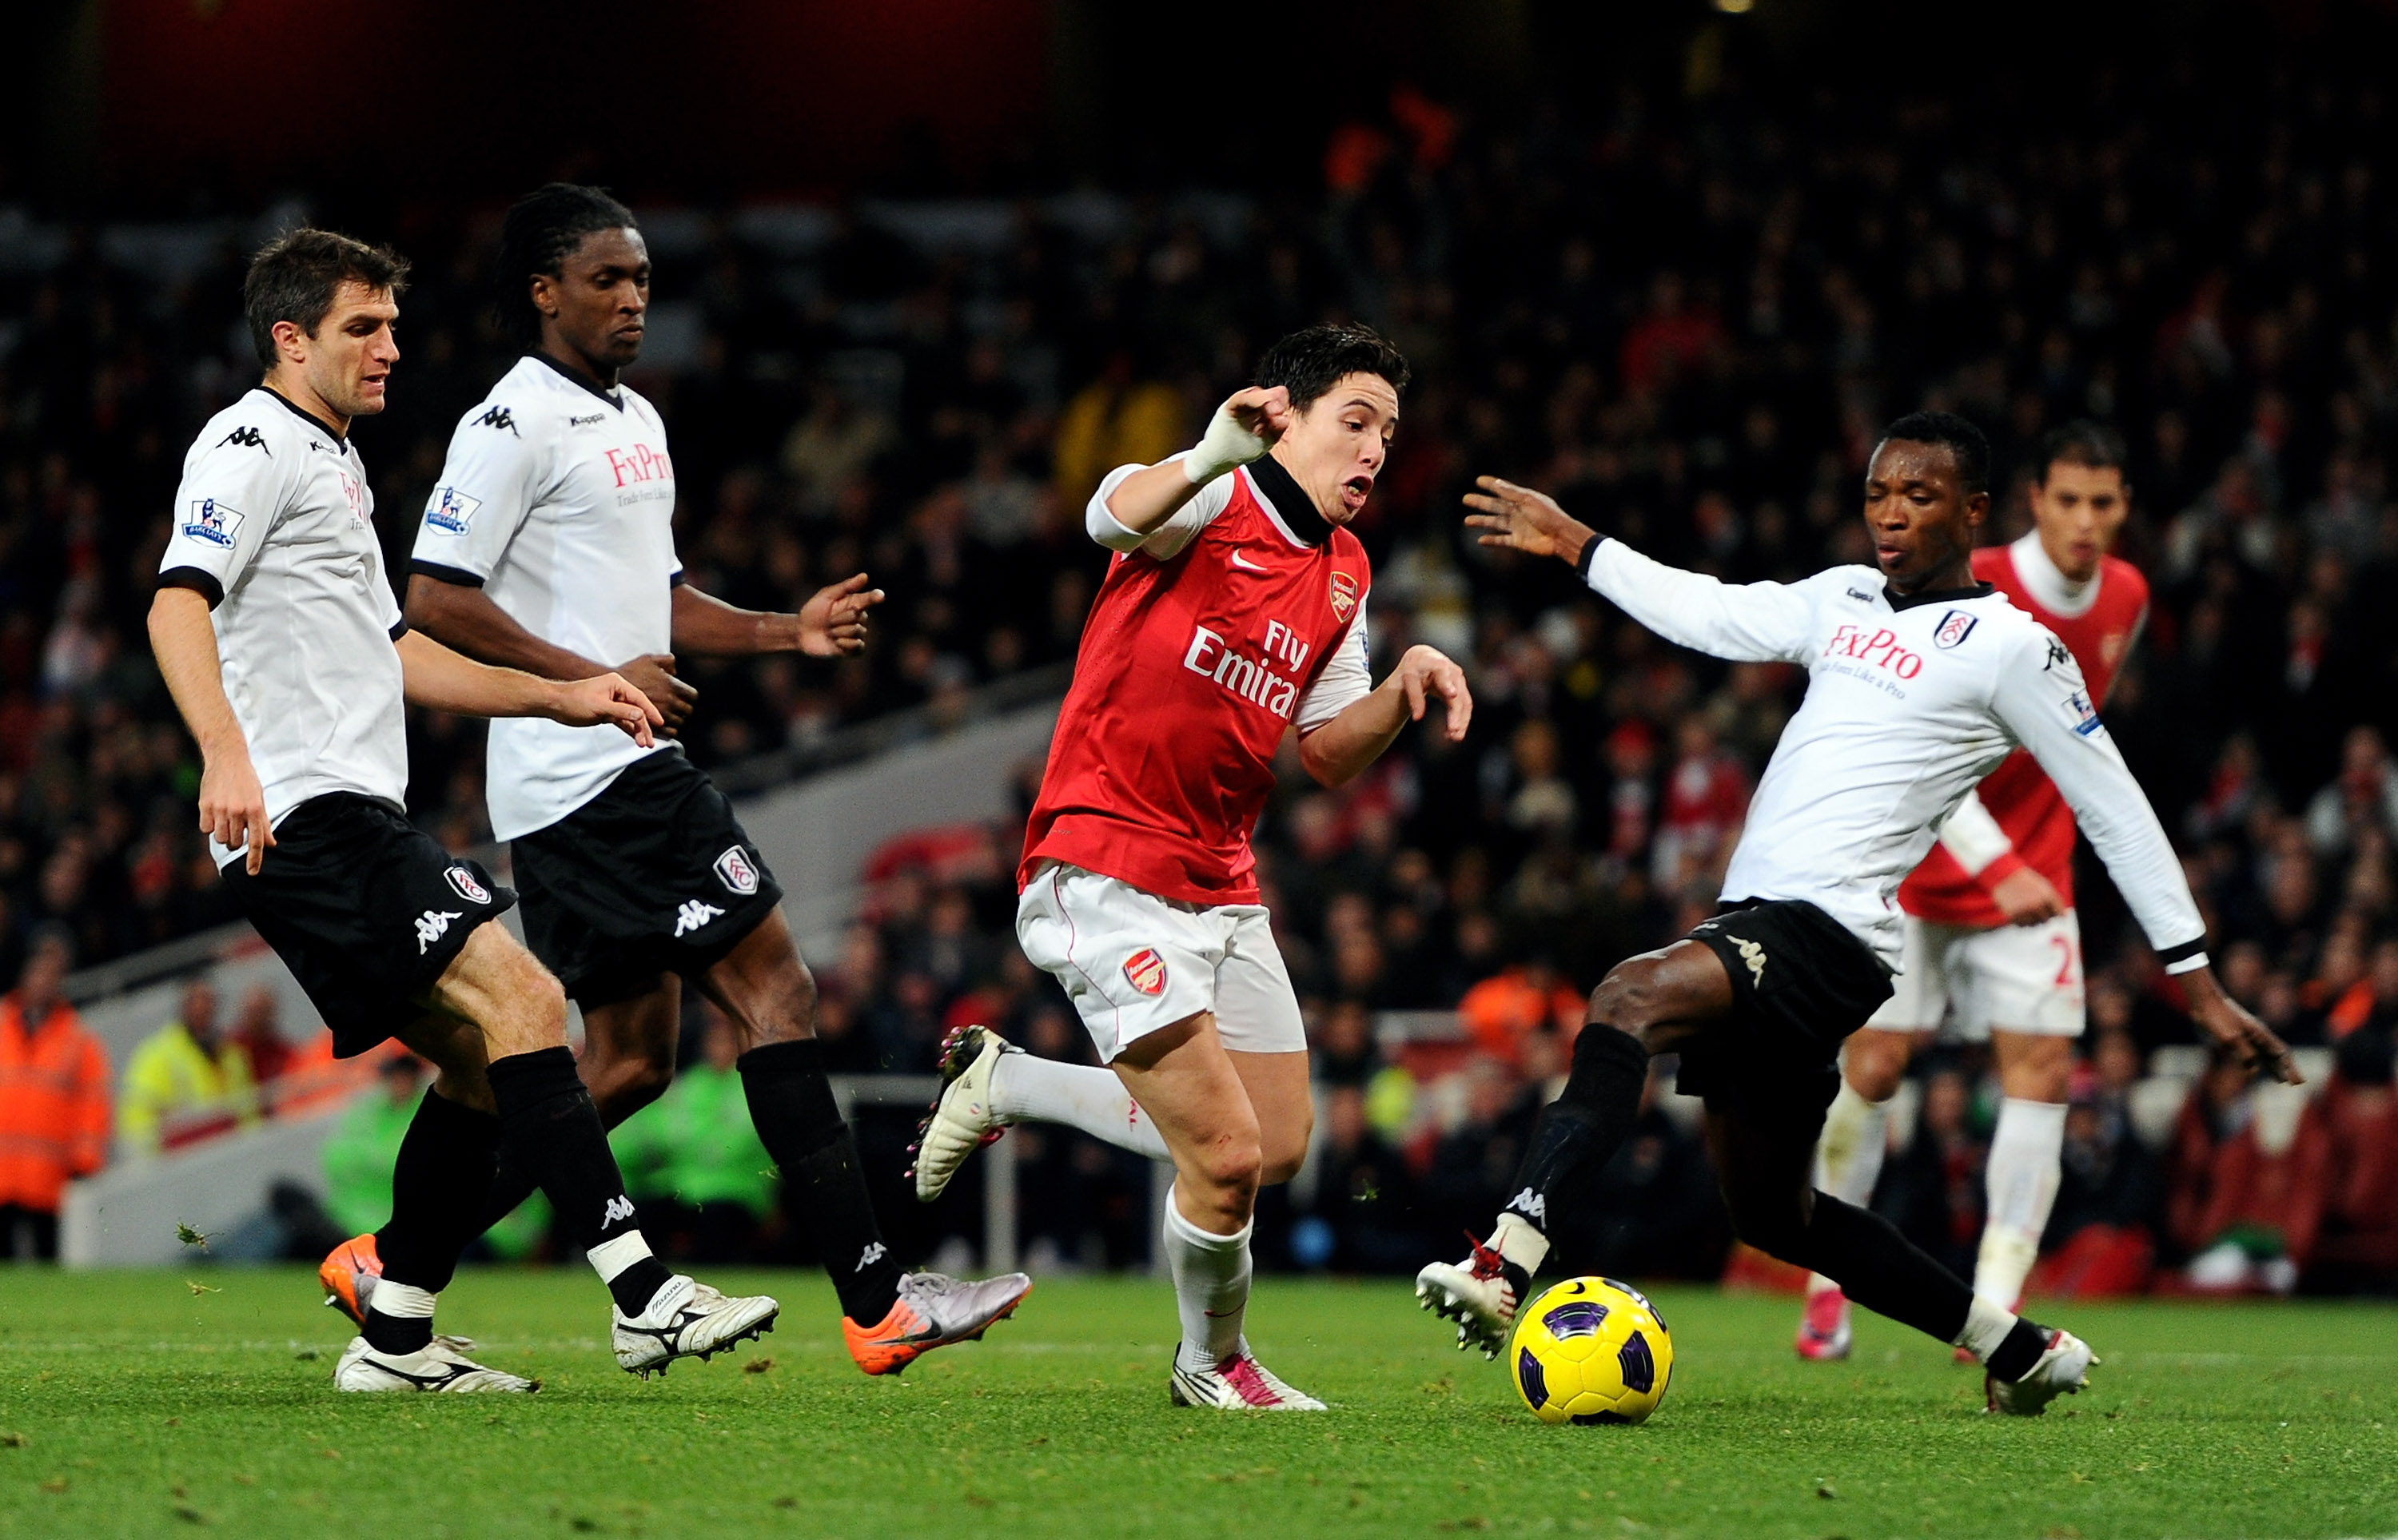 LONDON, ENGLAND - DECEMBER 04: Samir Nasri of Arsenal takes the ball past Fulham goalkeeper Mark Schwarzer to score the winning goal during the Barclays Premier League match between Arsenal and Fulham at the Emirates Stadium on December 4, 2010 in London,